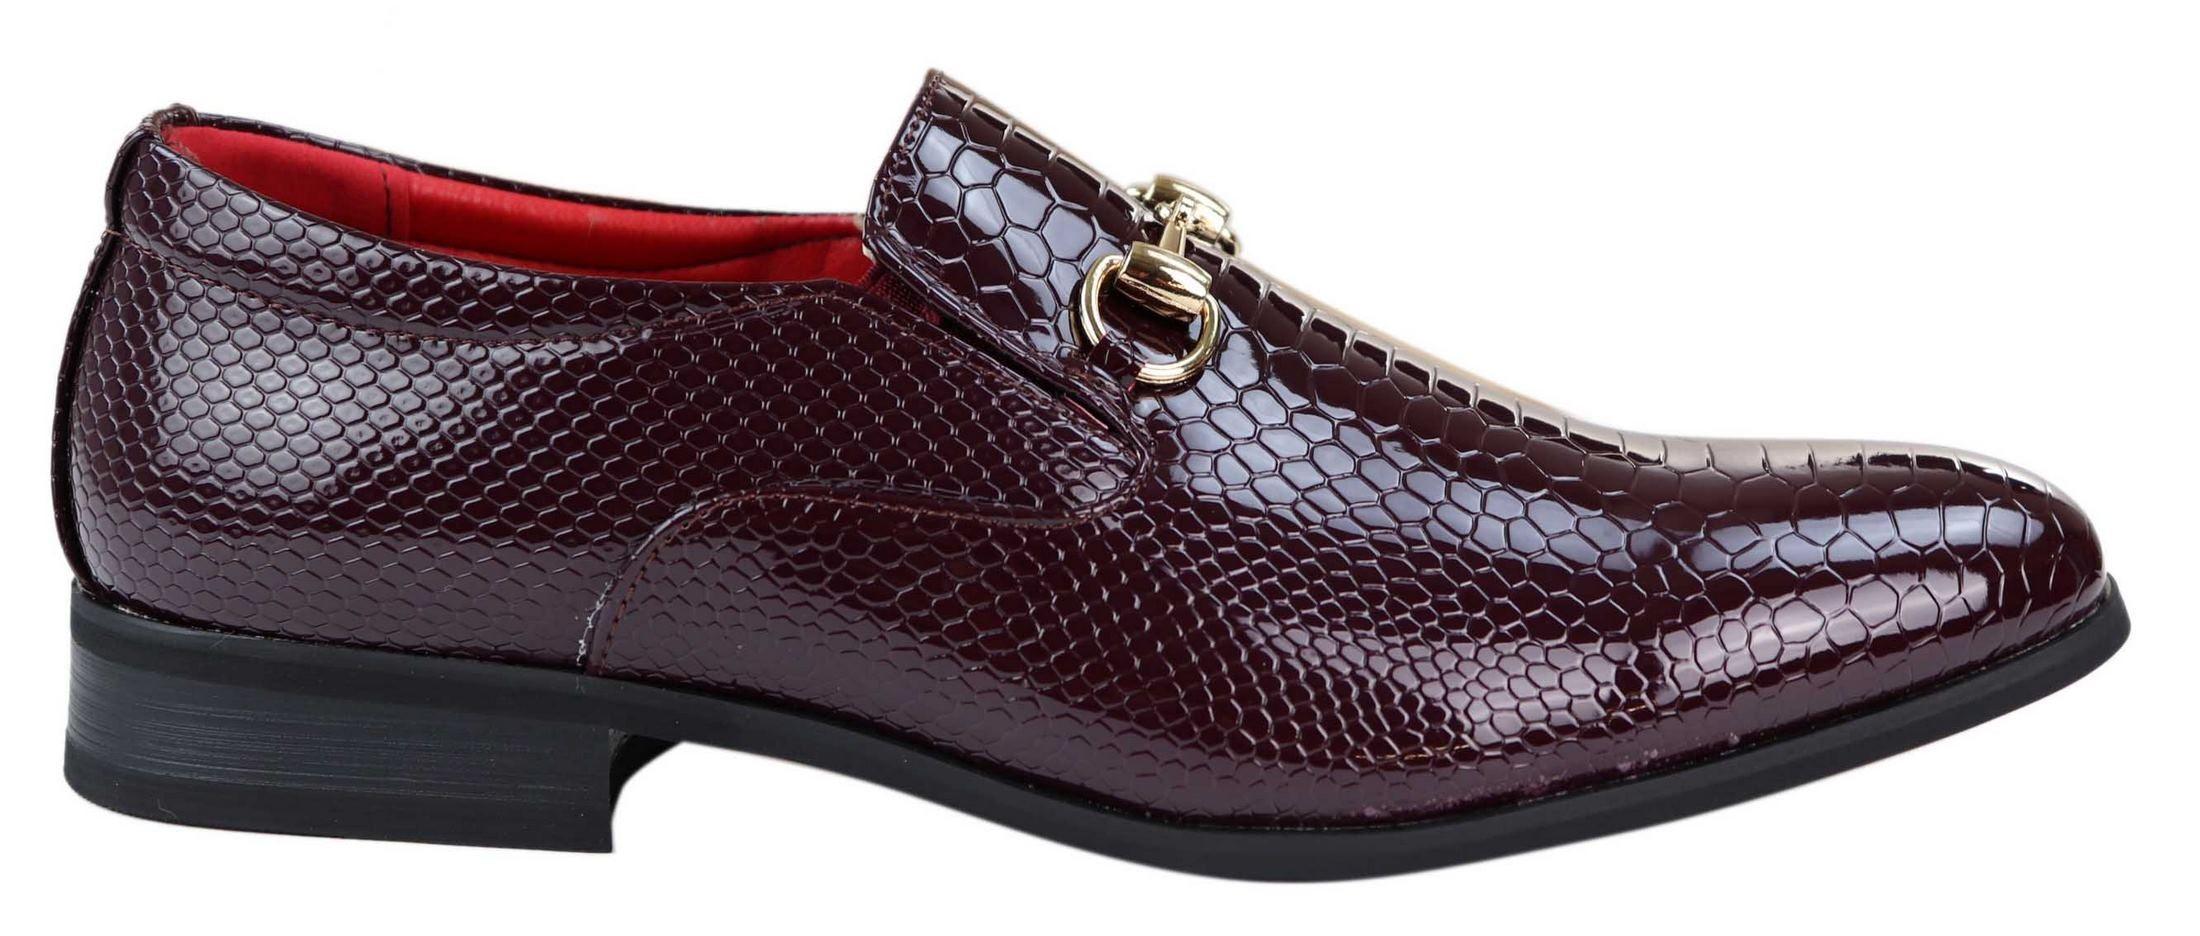 Mens PU Leather Snakeskin Patent Shoes - Wine-TruClothing